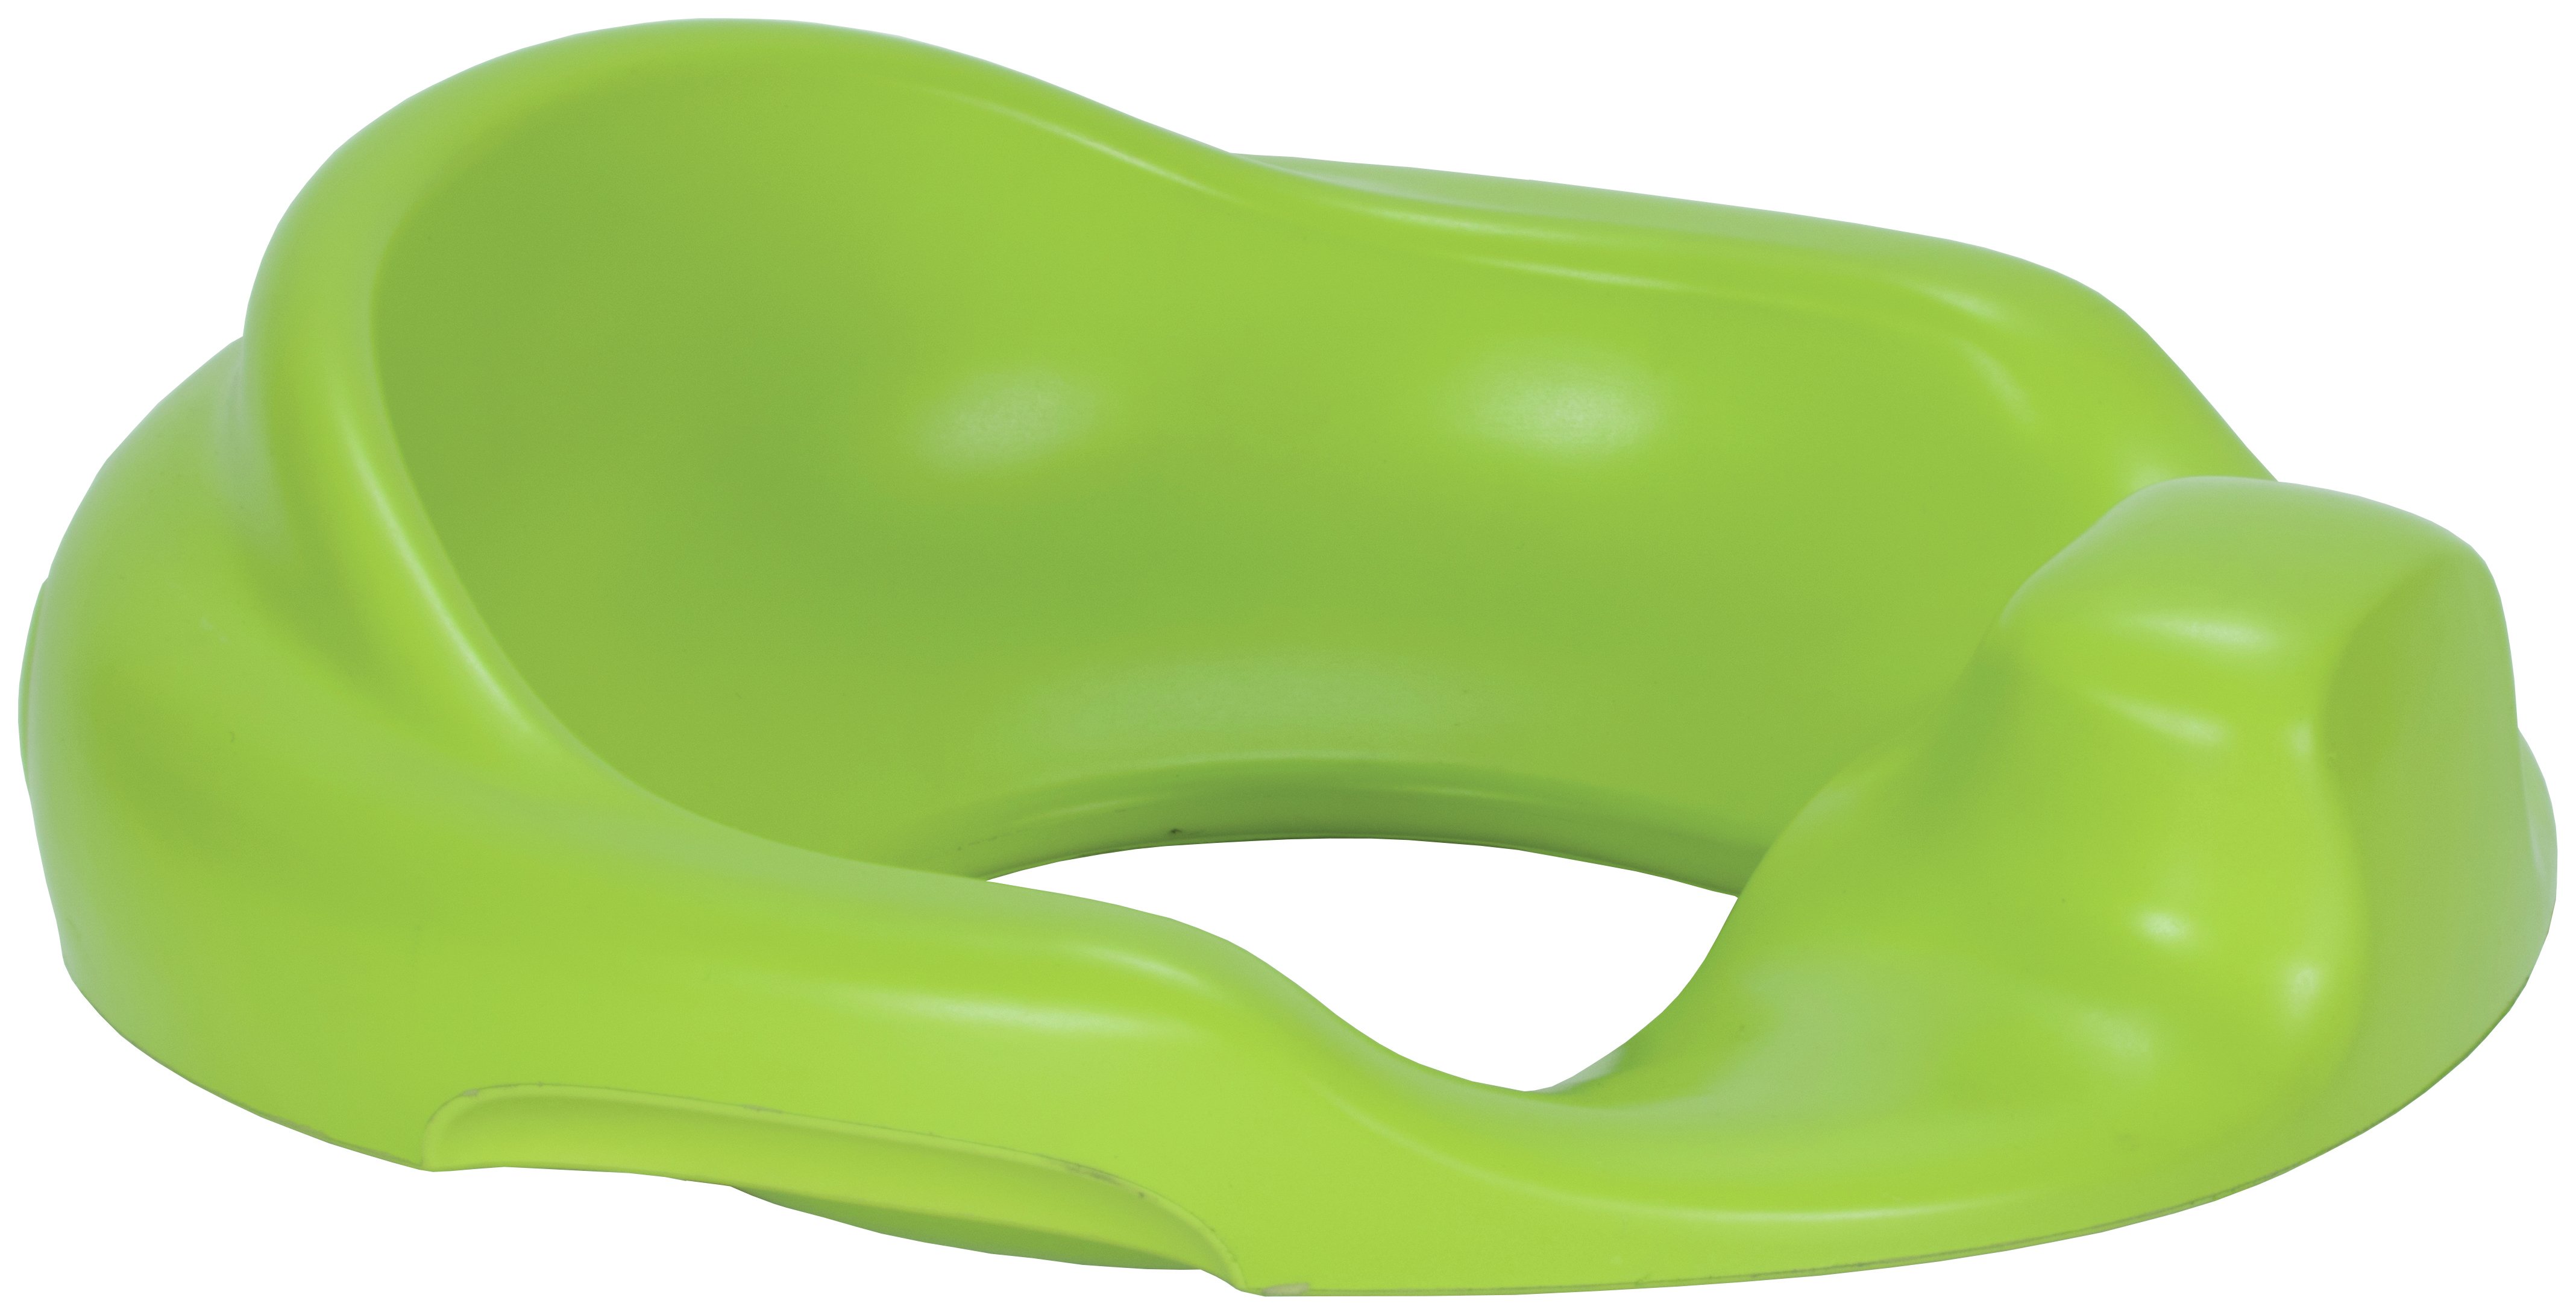 Bumbo Toilet Trainer - Lime